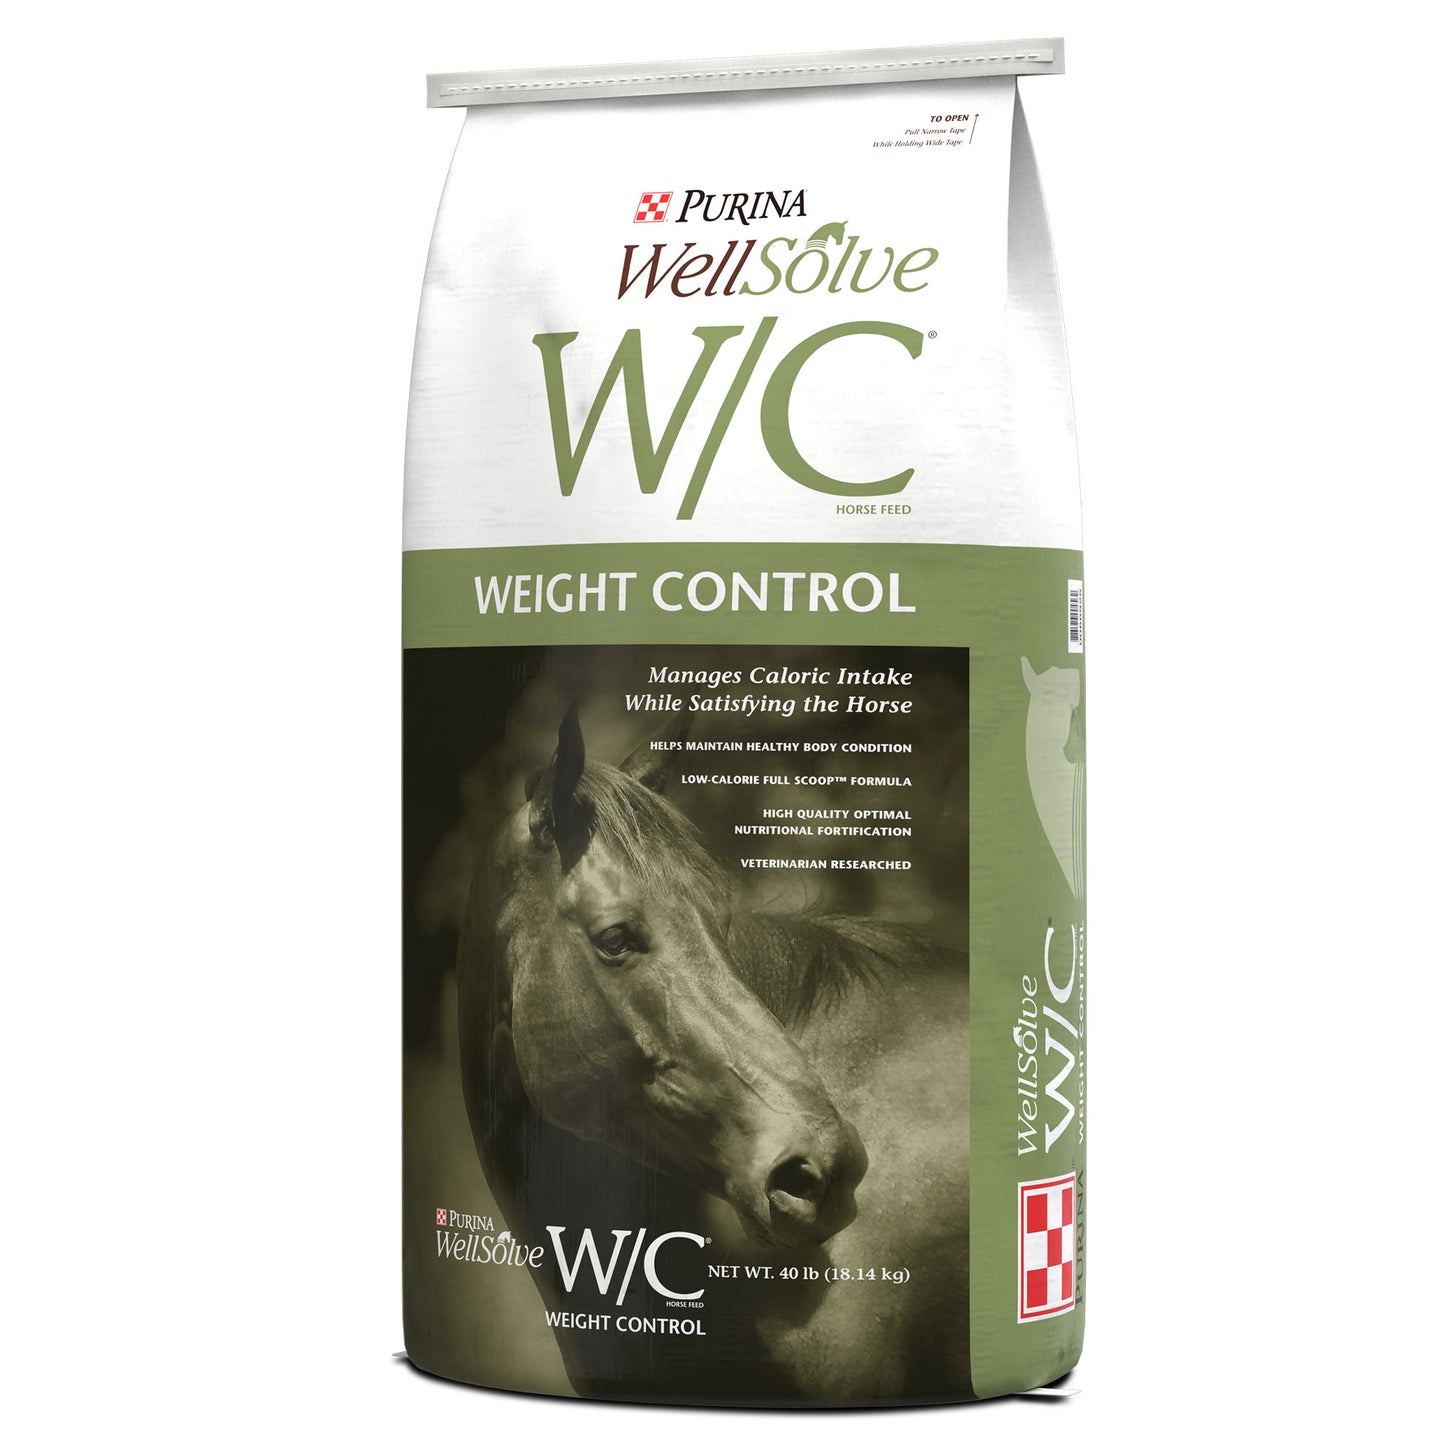 Right angle of Purina Wellsolve W/C 50 Pound Bag